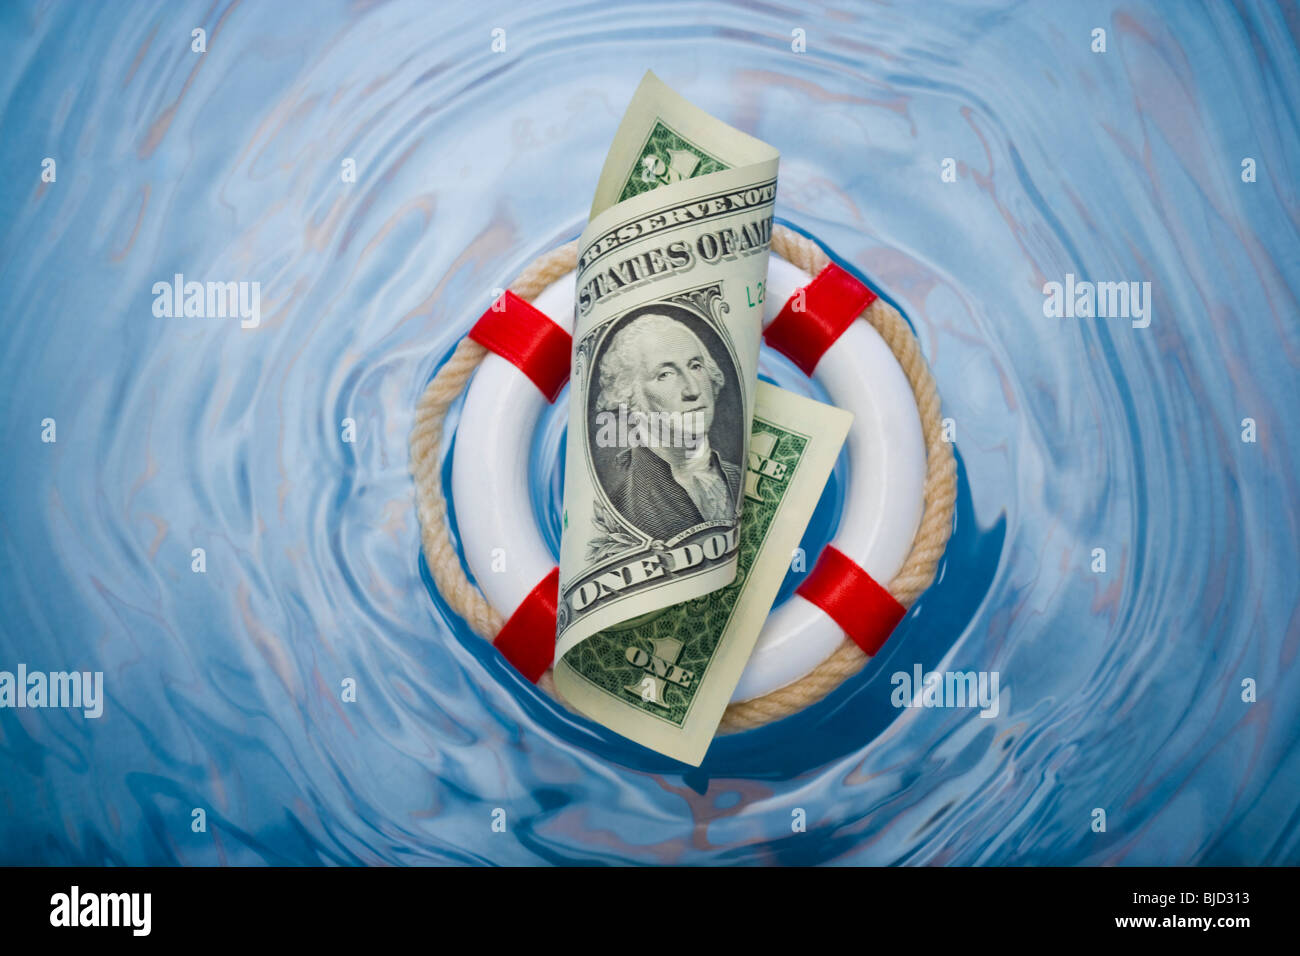 Money in a life saver. Stock Photo